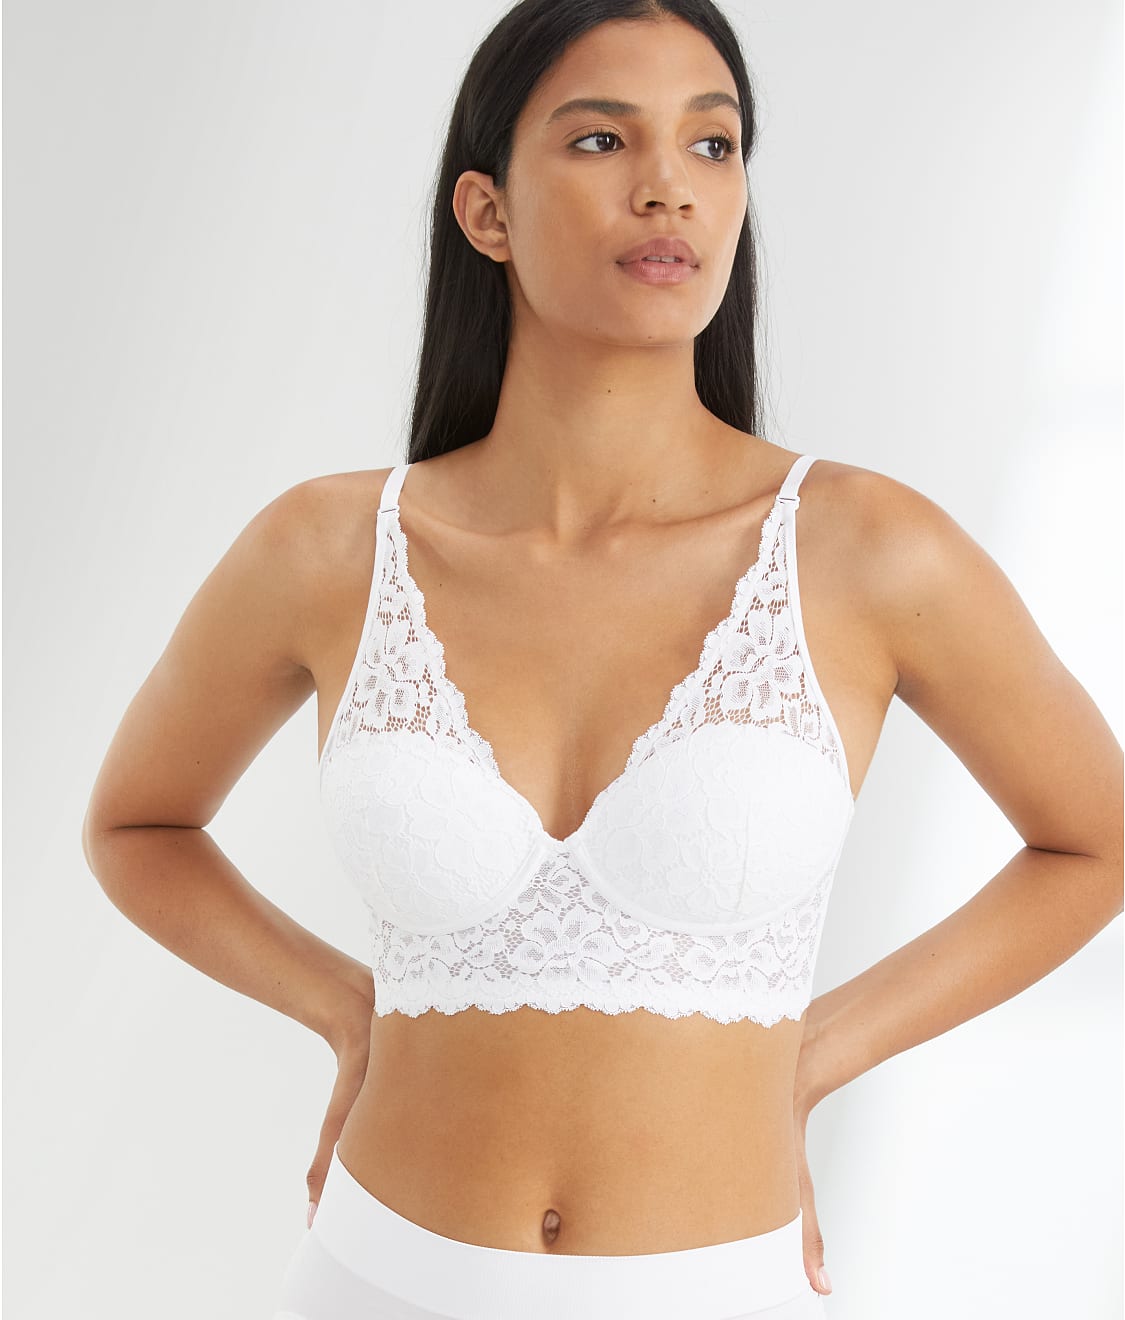 Lift and Separate Bras Half Cup Bra High Impact Padded Sports Bra Sleepwear  with Bust Support Plus Size Longline Sports Bra White Lace Bralette Halter